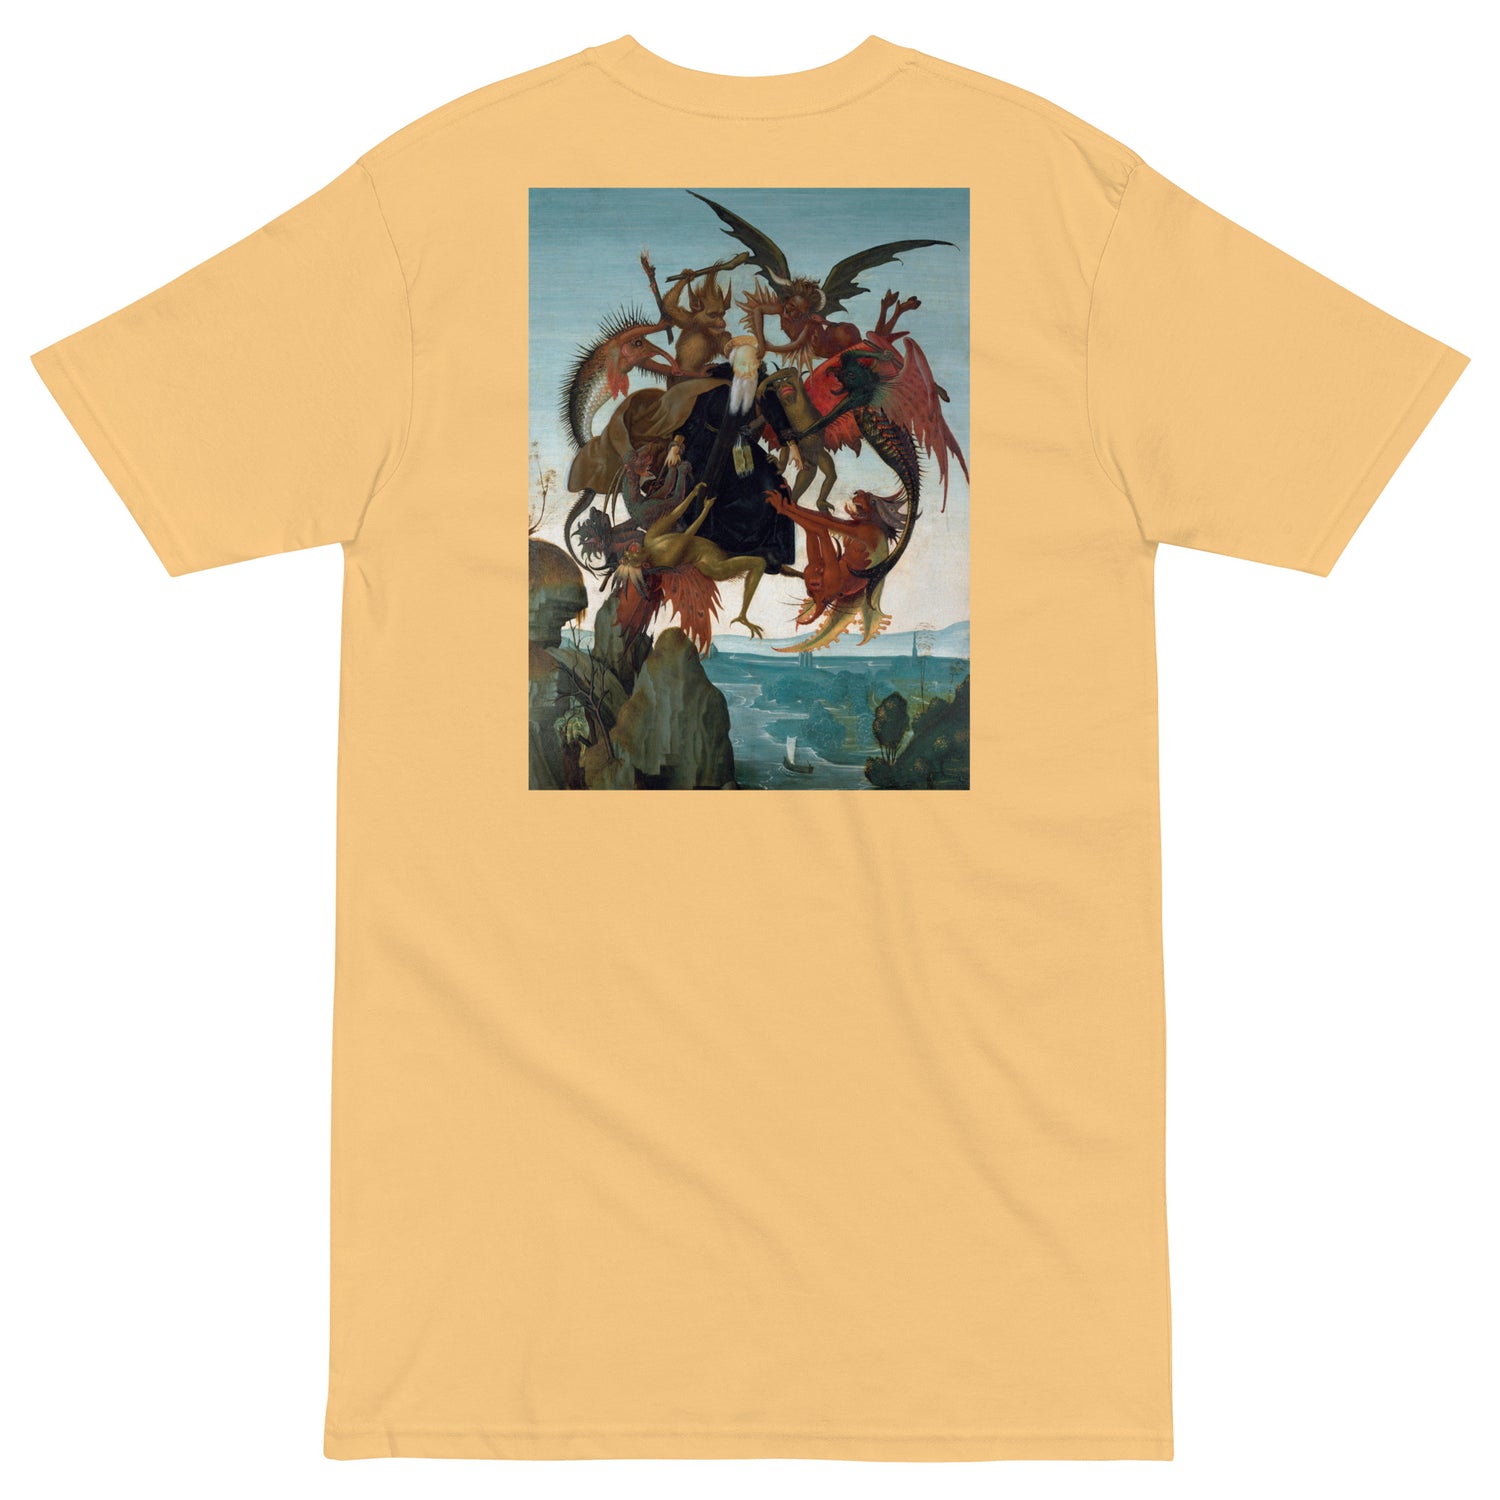 Michelangelo Buonarroti's The Torment of Saint Anthony Embroidered + Printed Premium Streetwear T-shirt